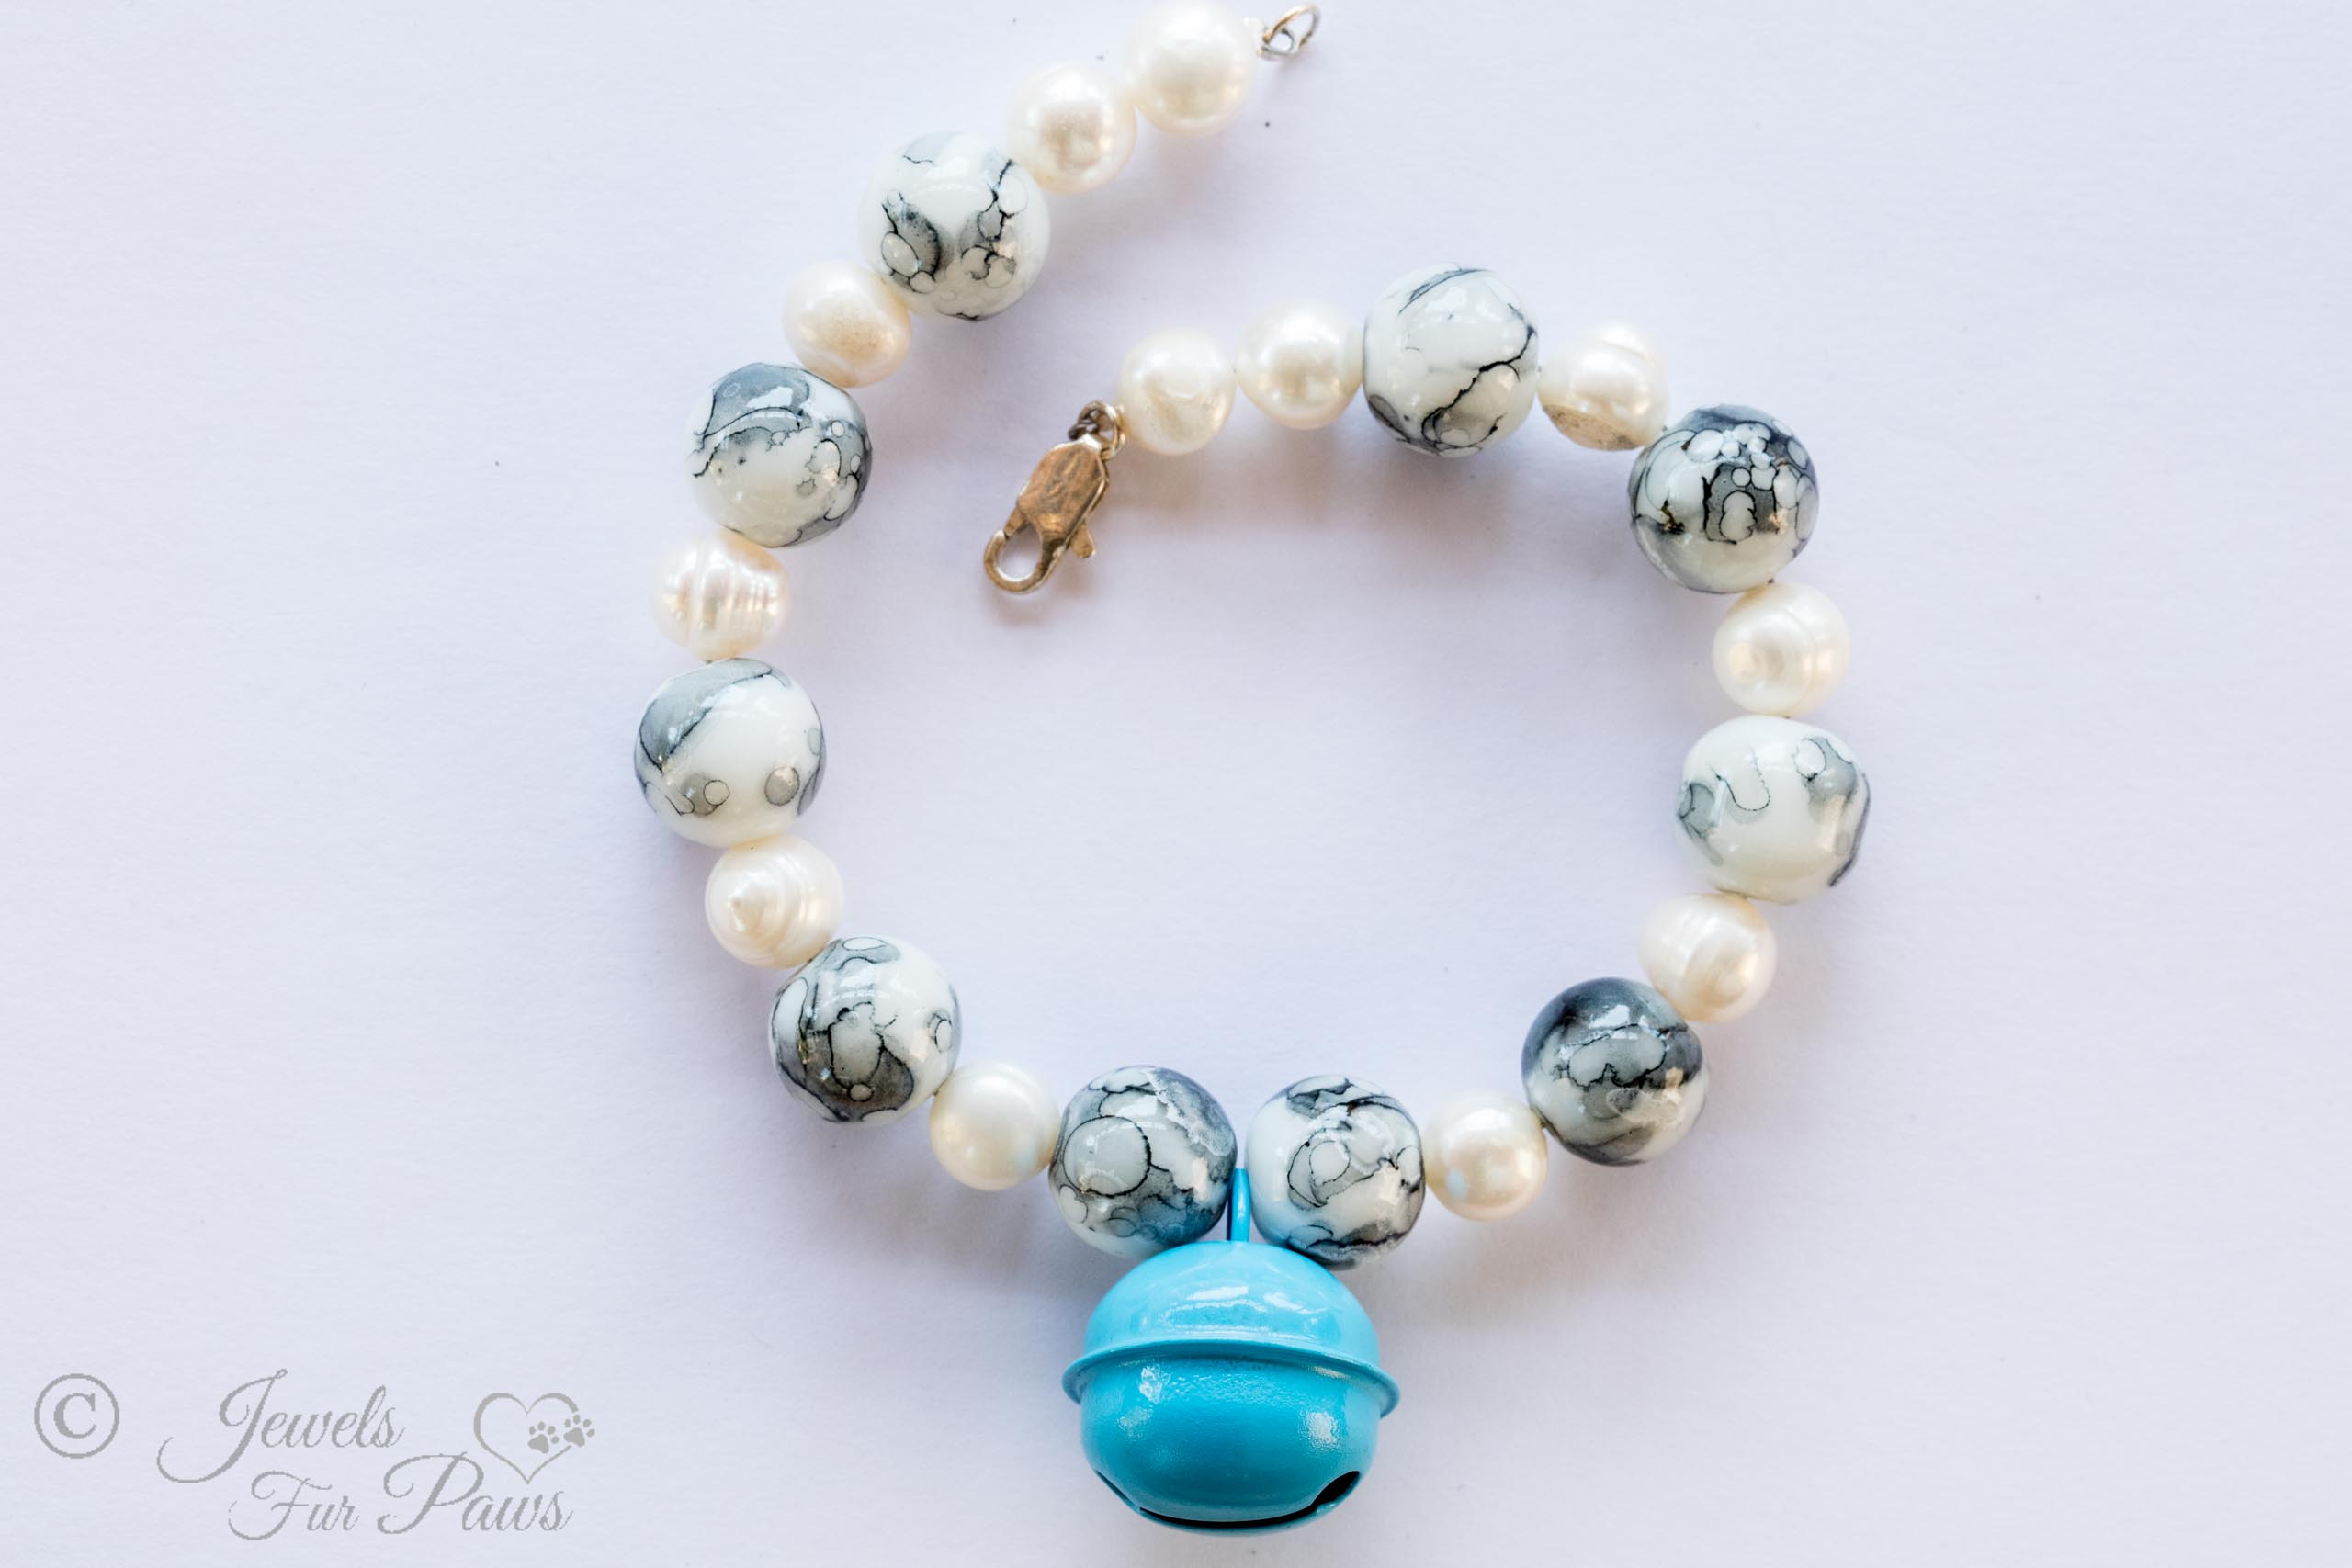 the bell in robin blue pet necklace with pearls and marbelized white and blue beads on white background